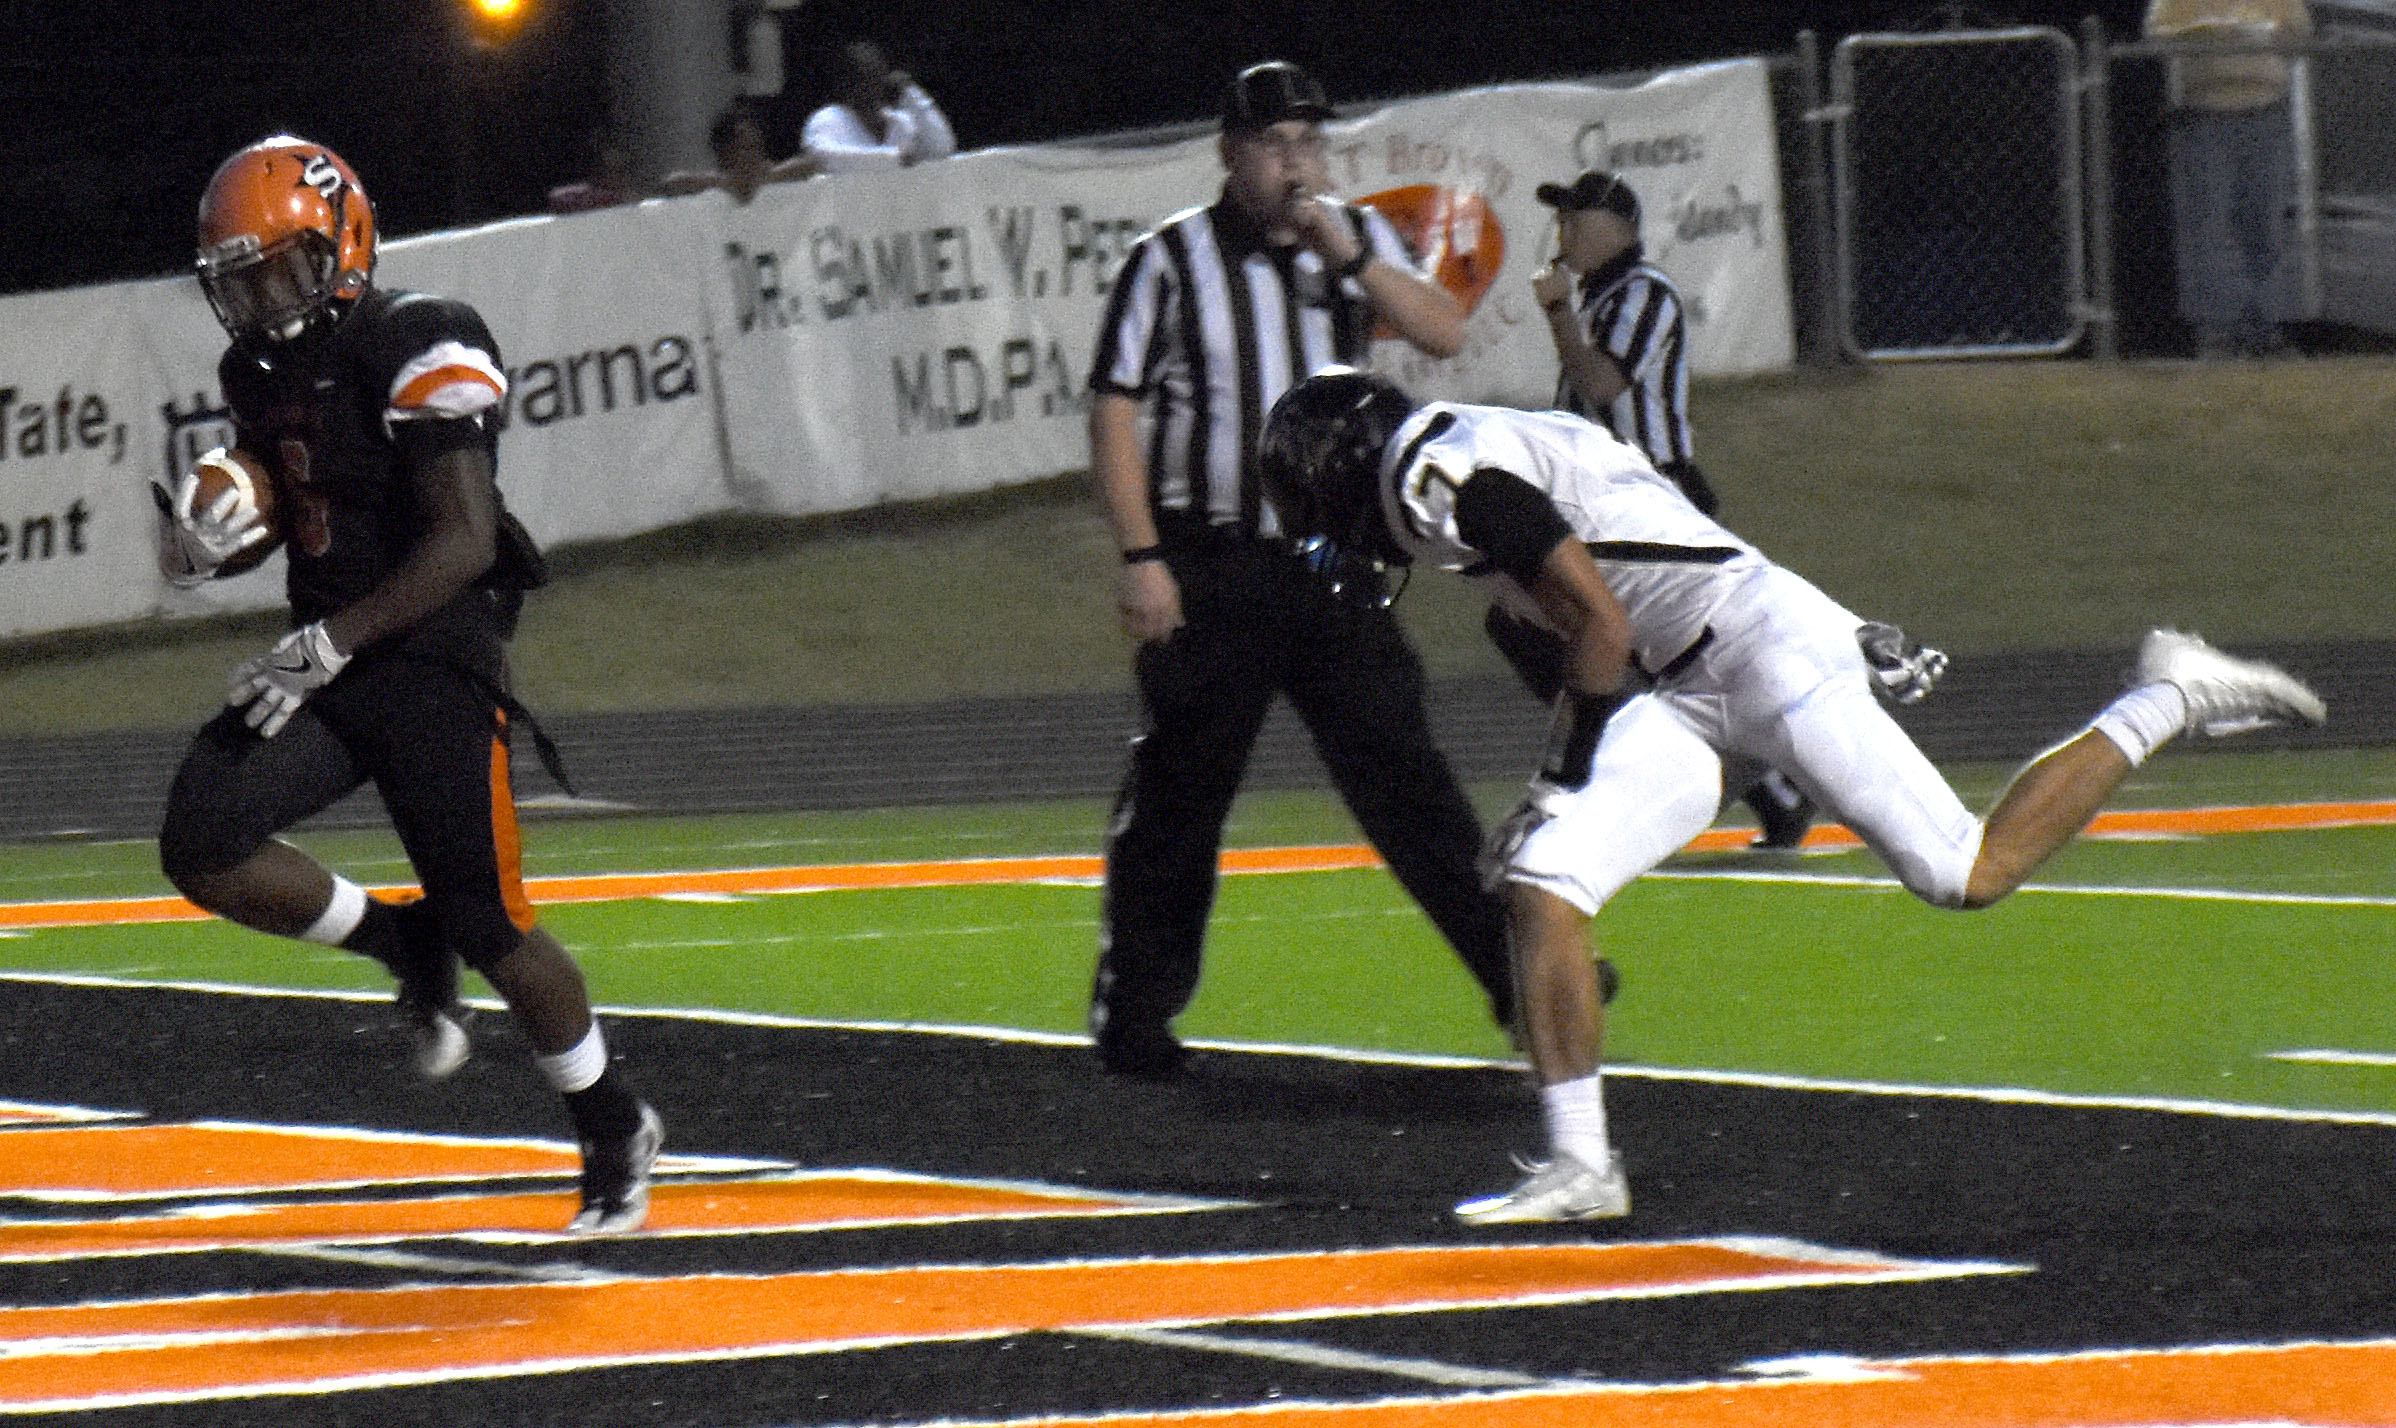 Trent Harris (6) outruns Corey Page of Joe T. Robinson for a Scrapper touchdown in the first quarter of Friday night's victory.